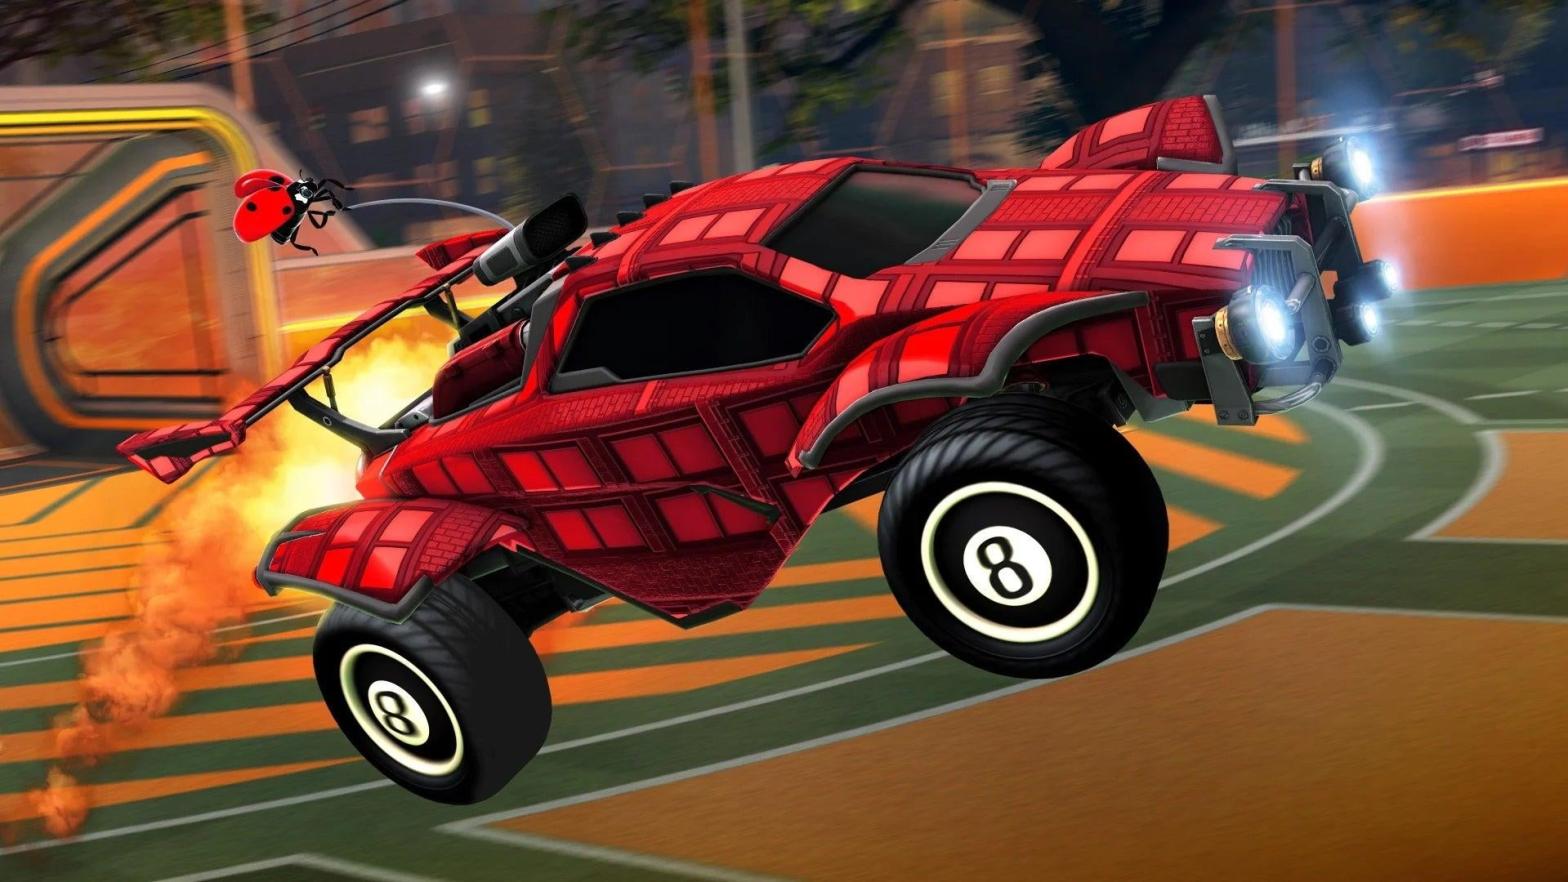 Rocket League has been beset by AI that is legitimately as good or even better than some elite players. (Image: Psyonix)